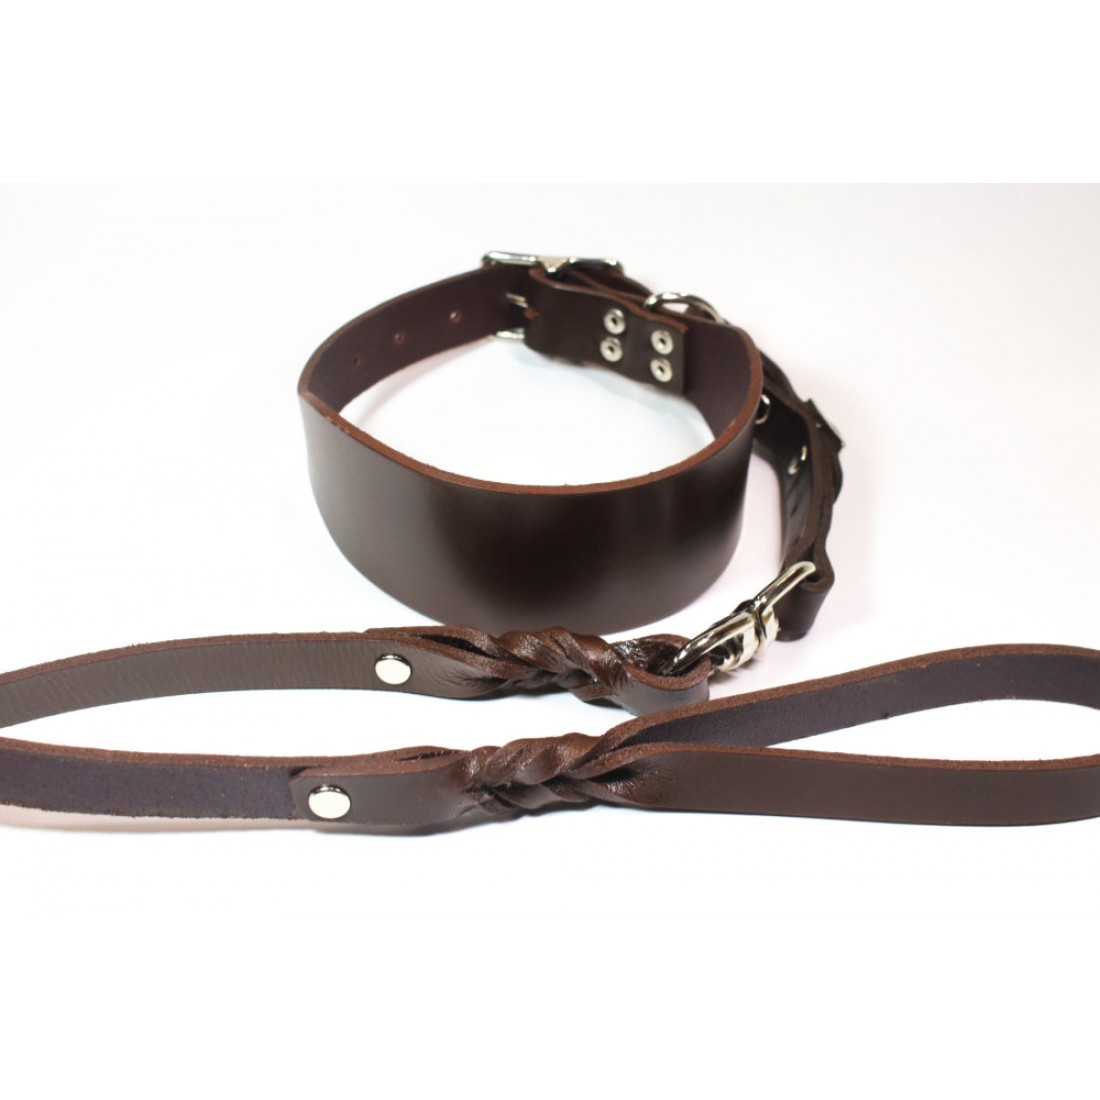 Hand-made and hand-stitched collar and lead set for Greyhounds